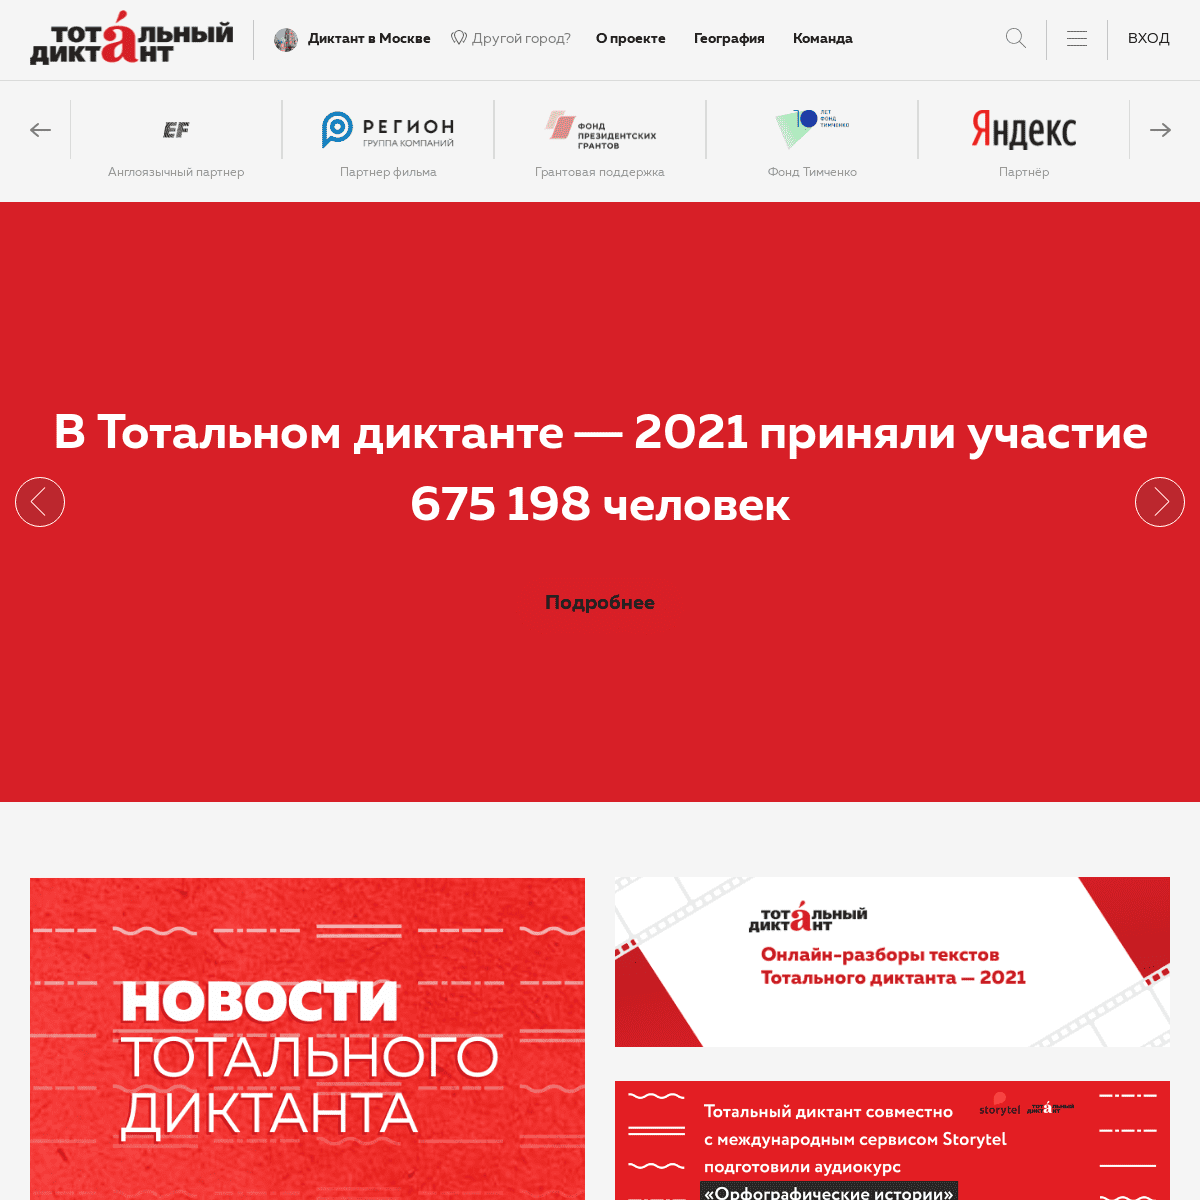 A complete backup of https://totaldict.ru